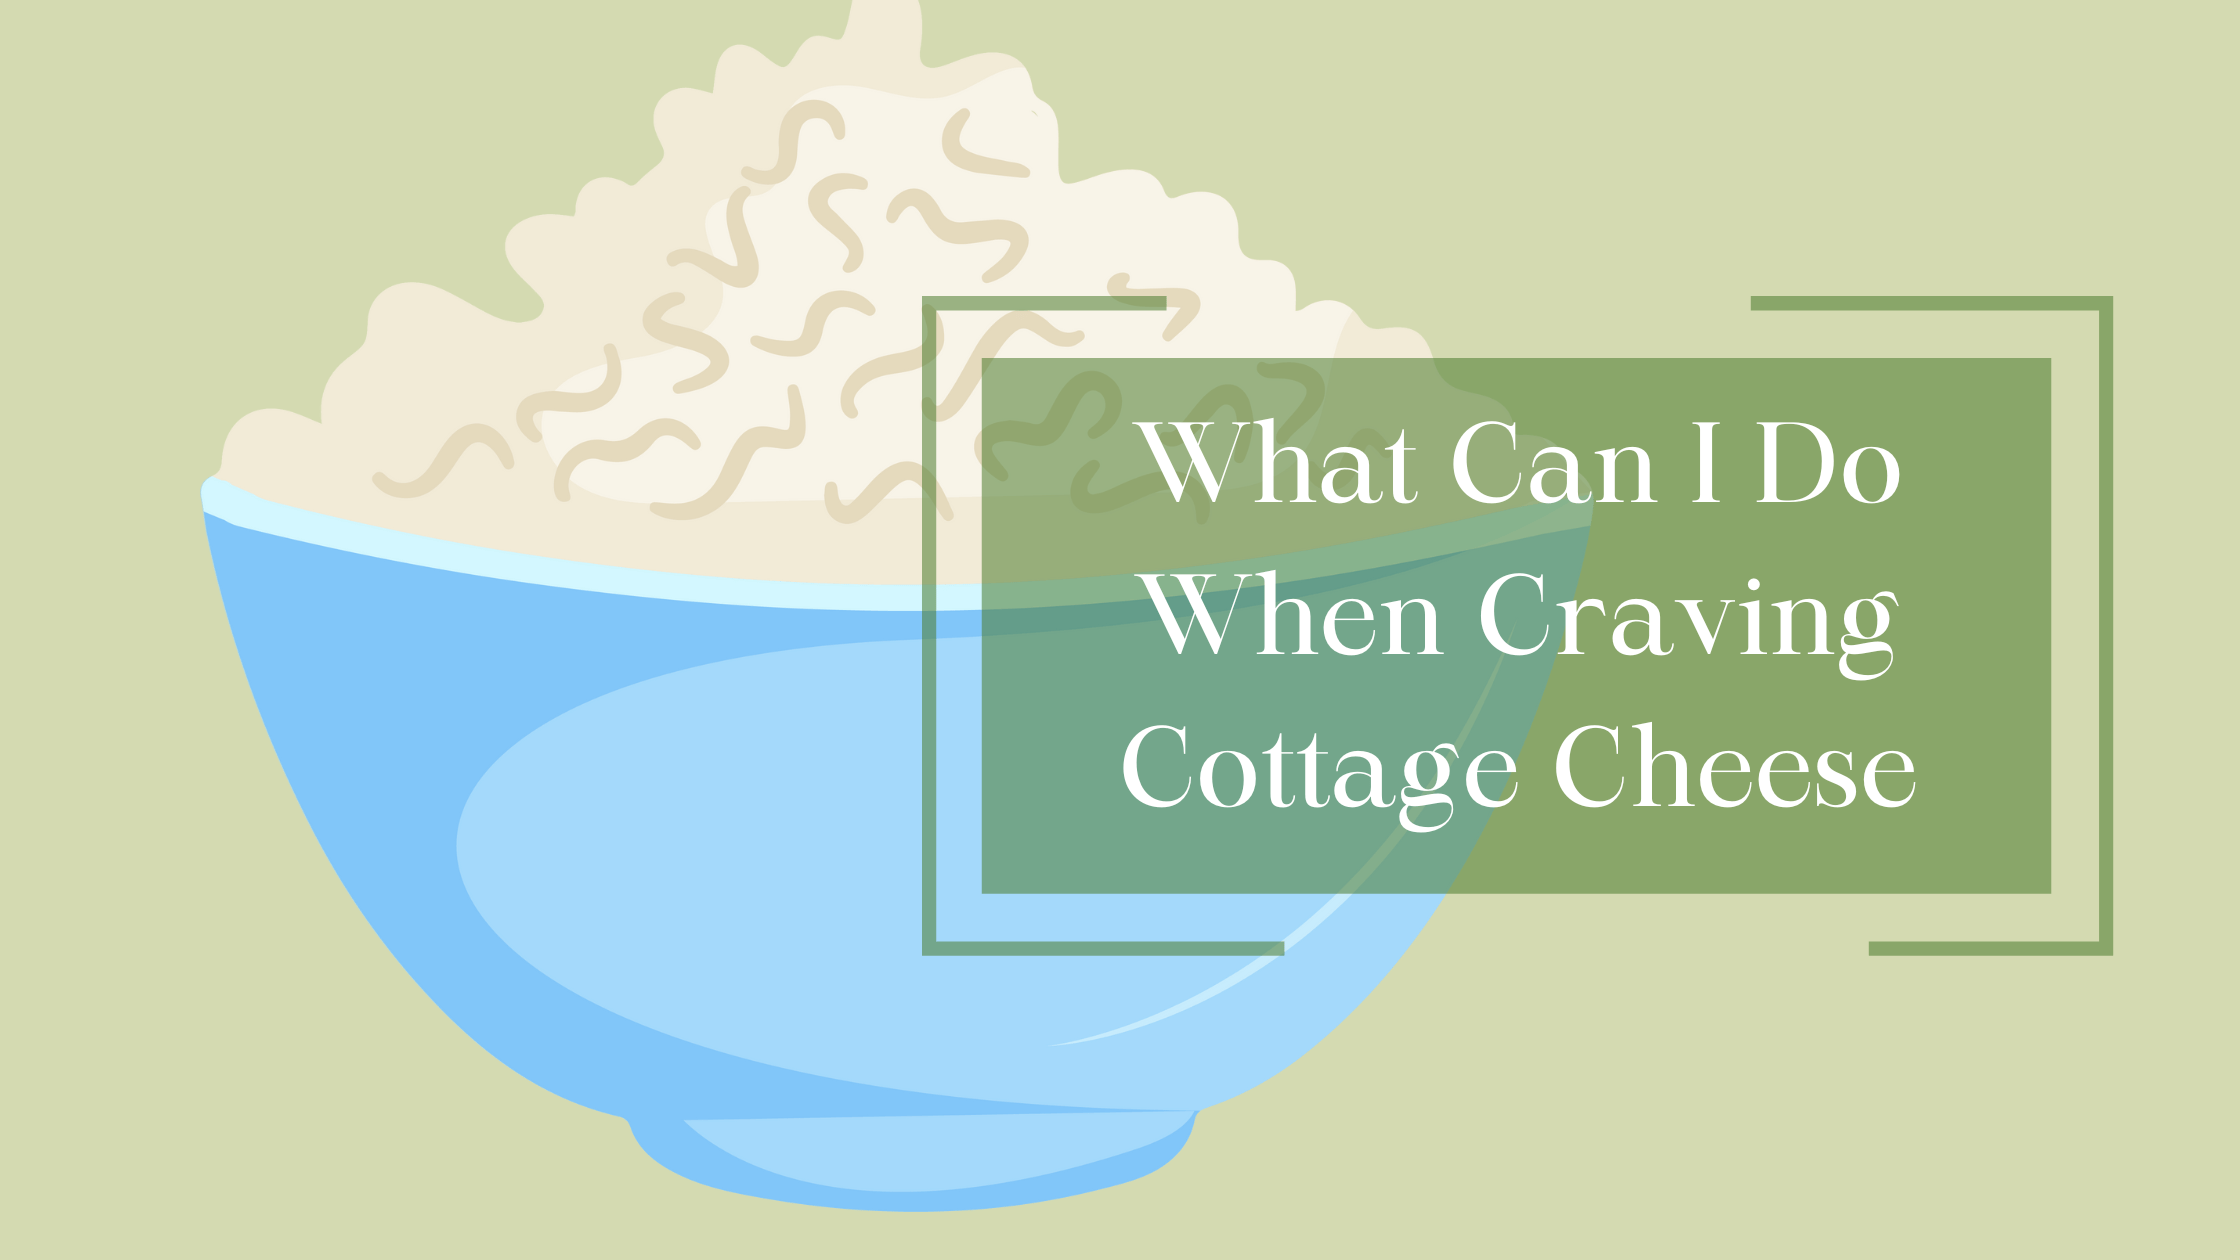 Craving Cottage Cheese